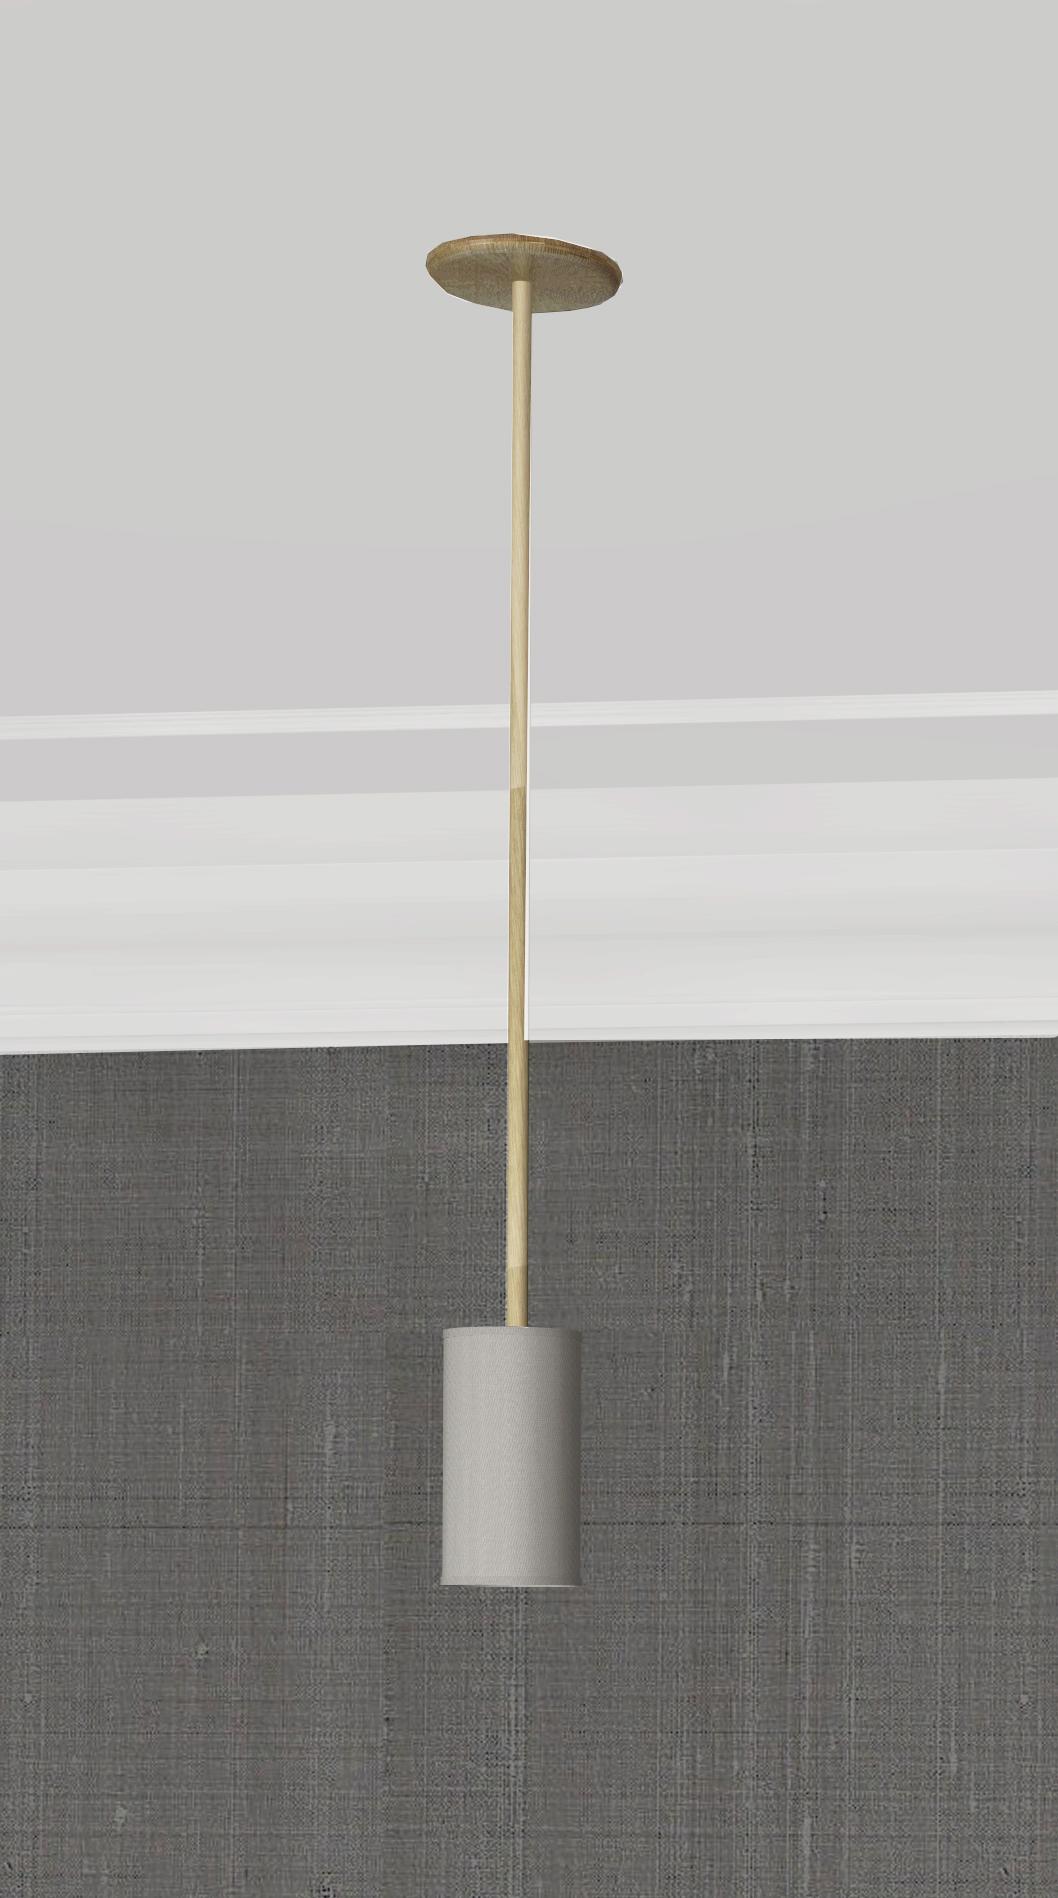 This pendant is a modern take on tradition. Beautifully crafted with elegant materials including brushed brass and sateen shades. The tall, timeless shades add a modern touch to the classic motif base, giving a familiar, yet forward looking